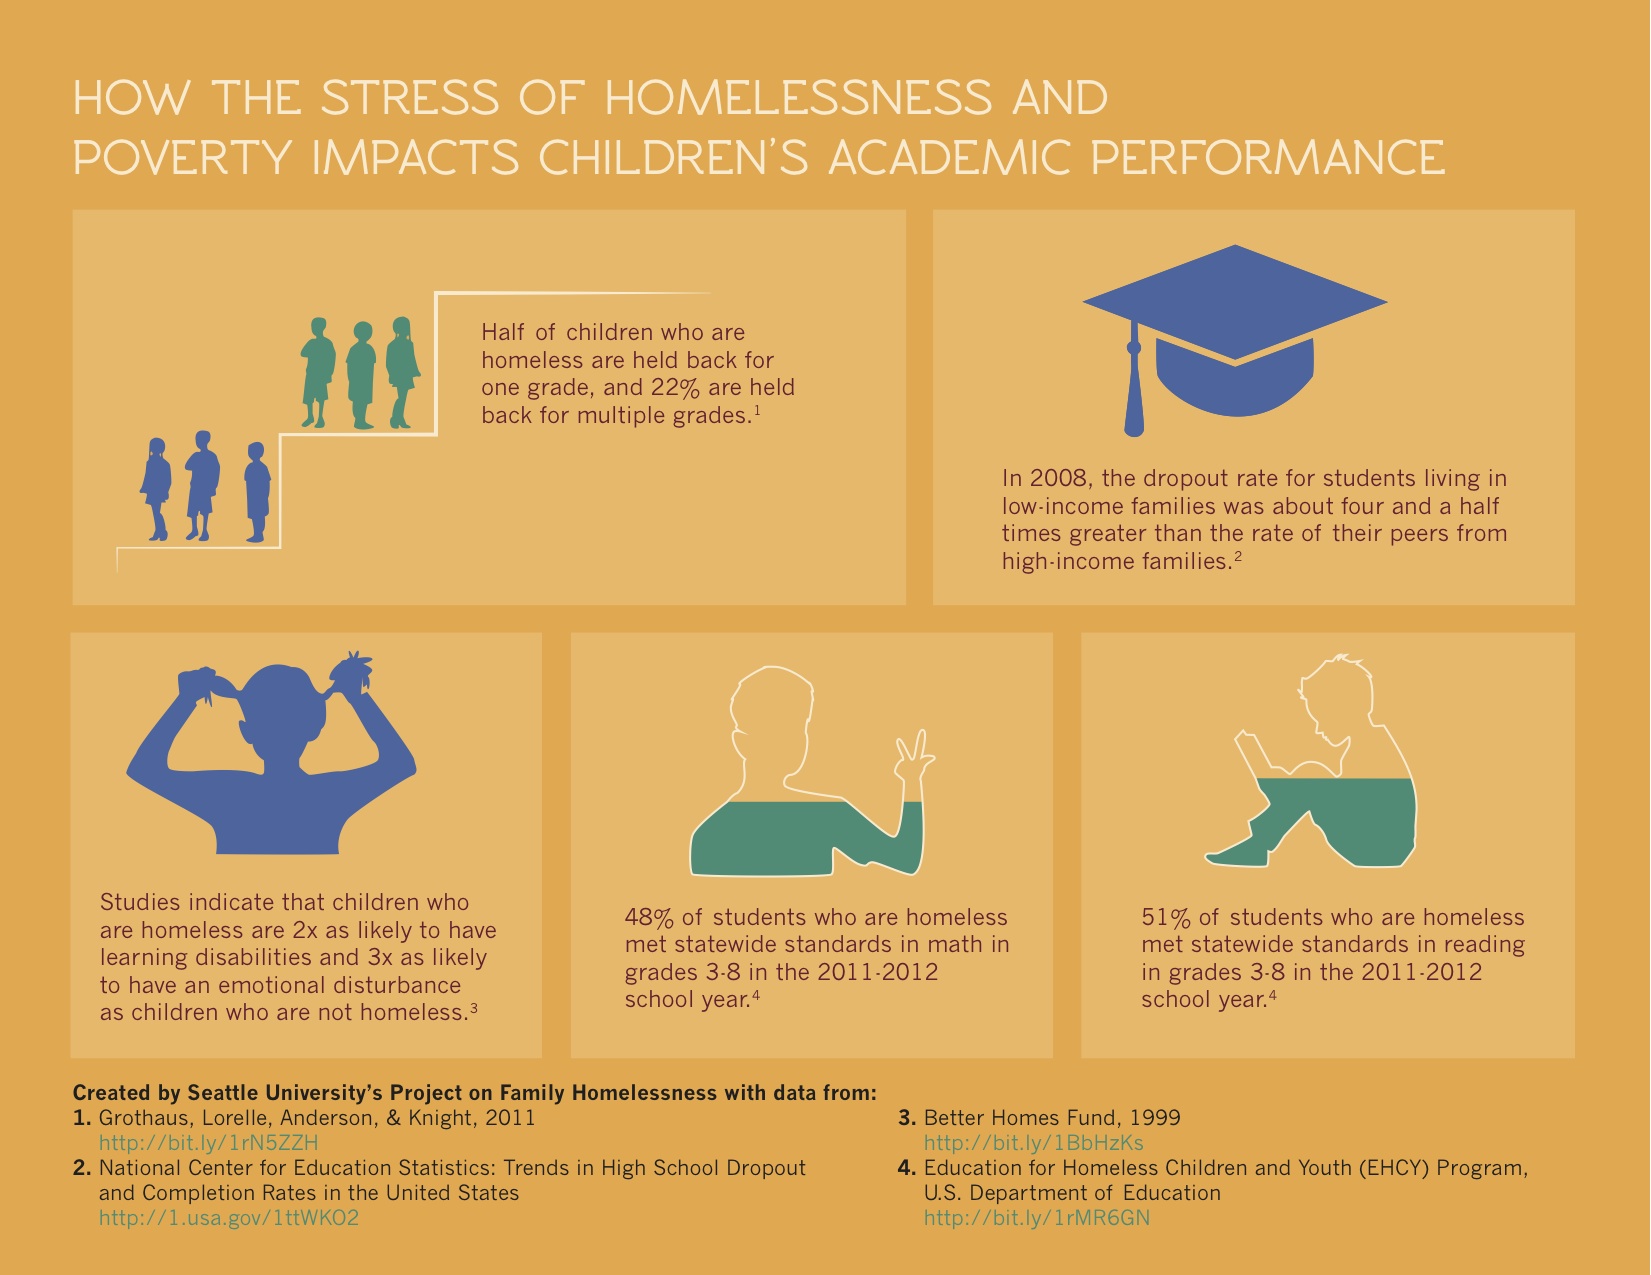 How the Stress of Homelessness and Poverty Impacts Children's Academic Performance